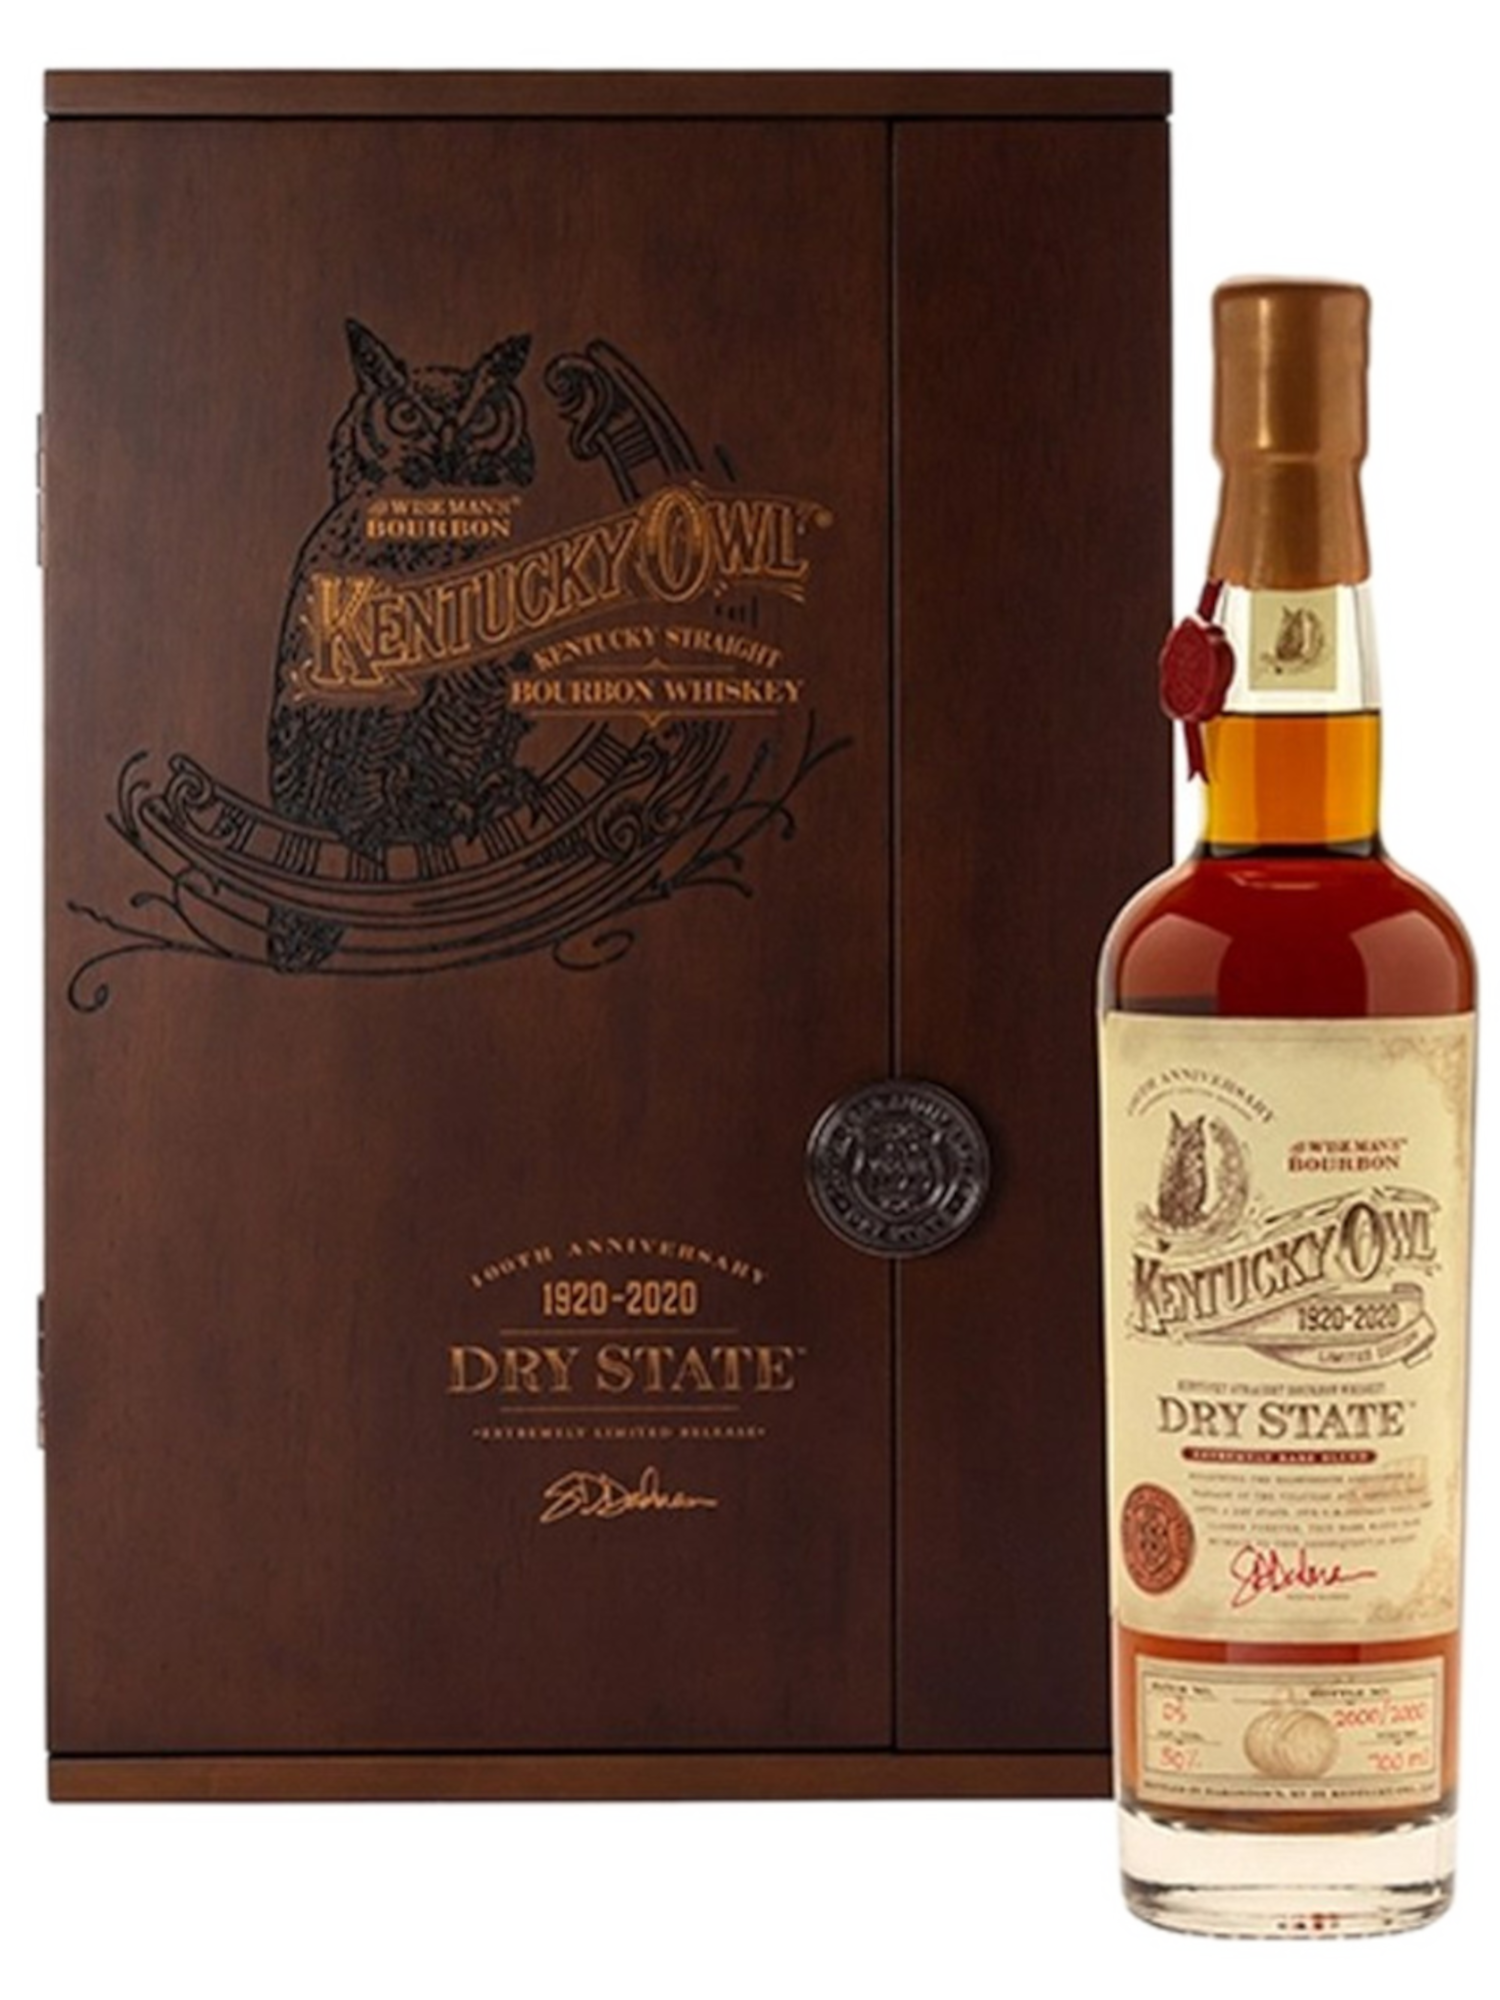 Kentucky Owl Dry State 100th Anniversary Edition